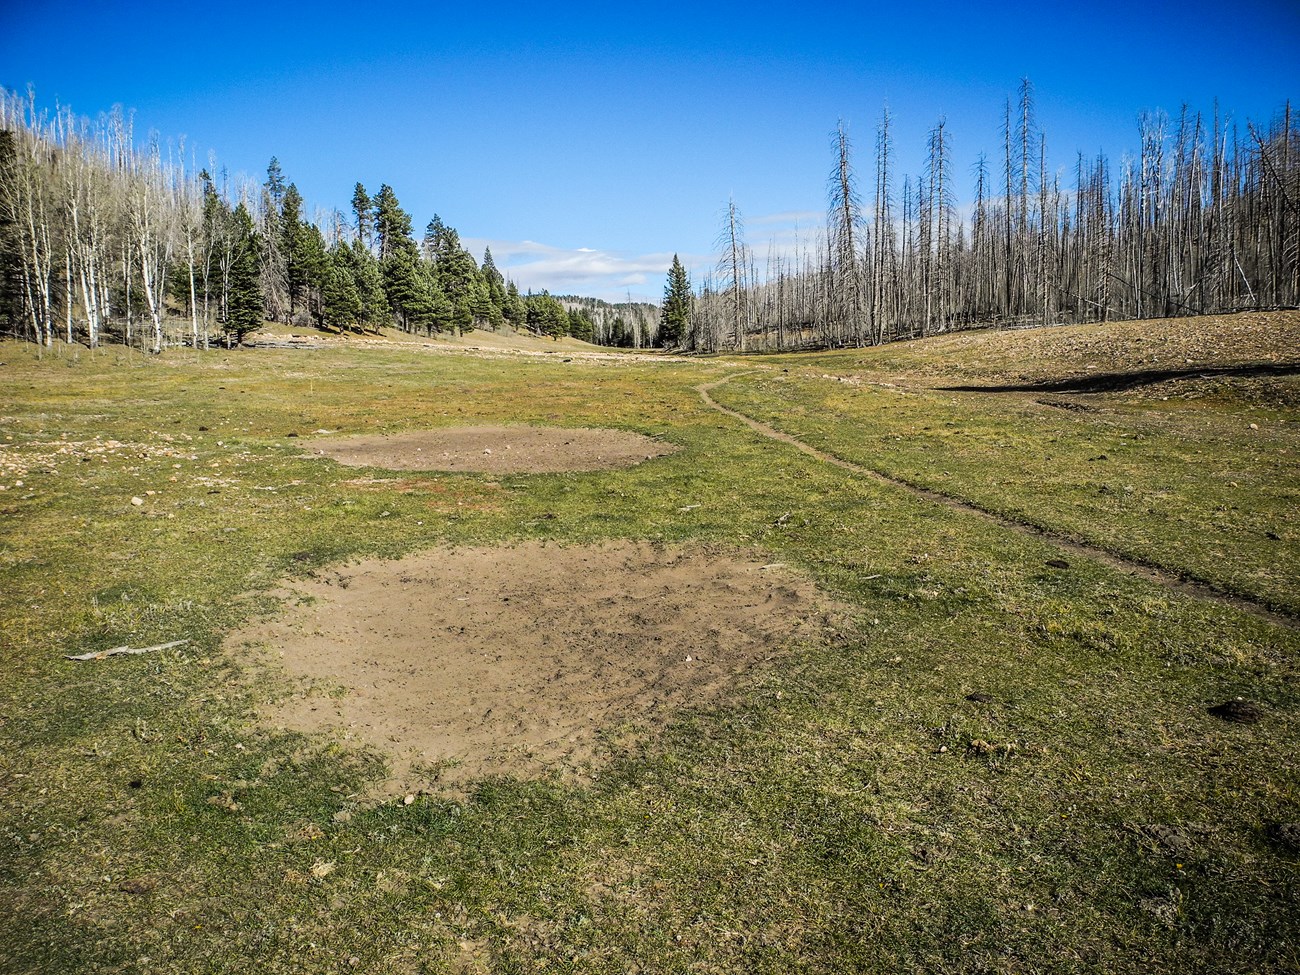 Large wallows and deep game trail in grassy meadow near forest's edge.